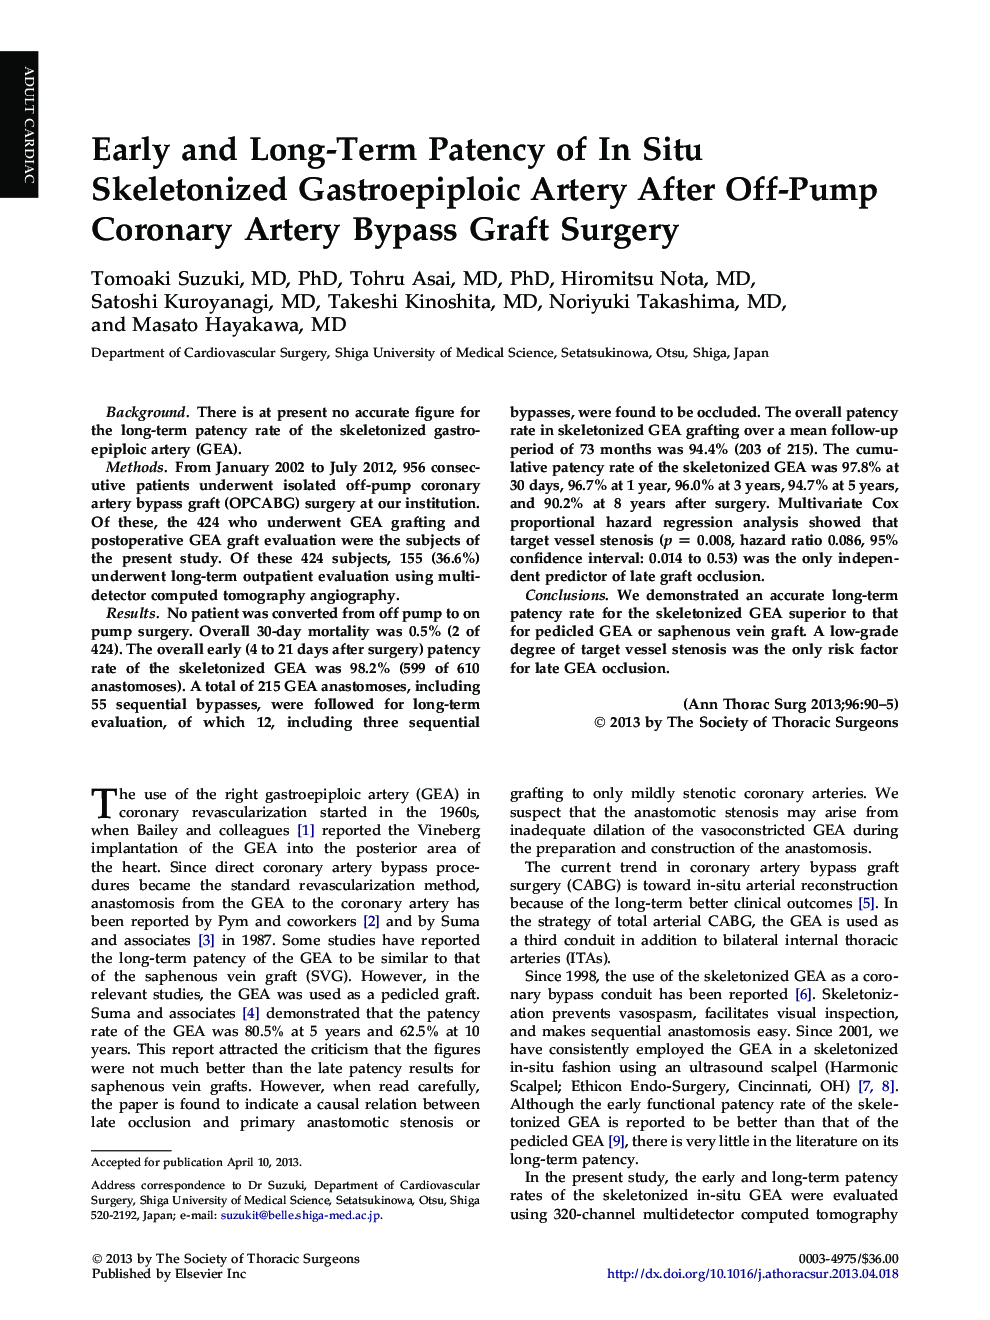 Early and Long-Term Patency of In Situ Skeletonized Gastroepiploic Artery After Off-Pump Coronary Artery Bypass Graft Surgery